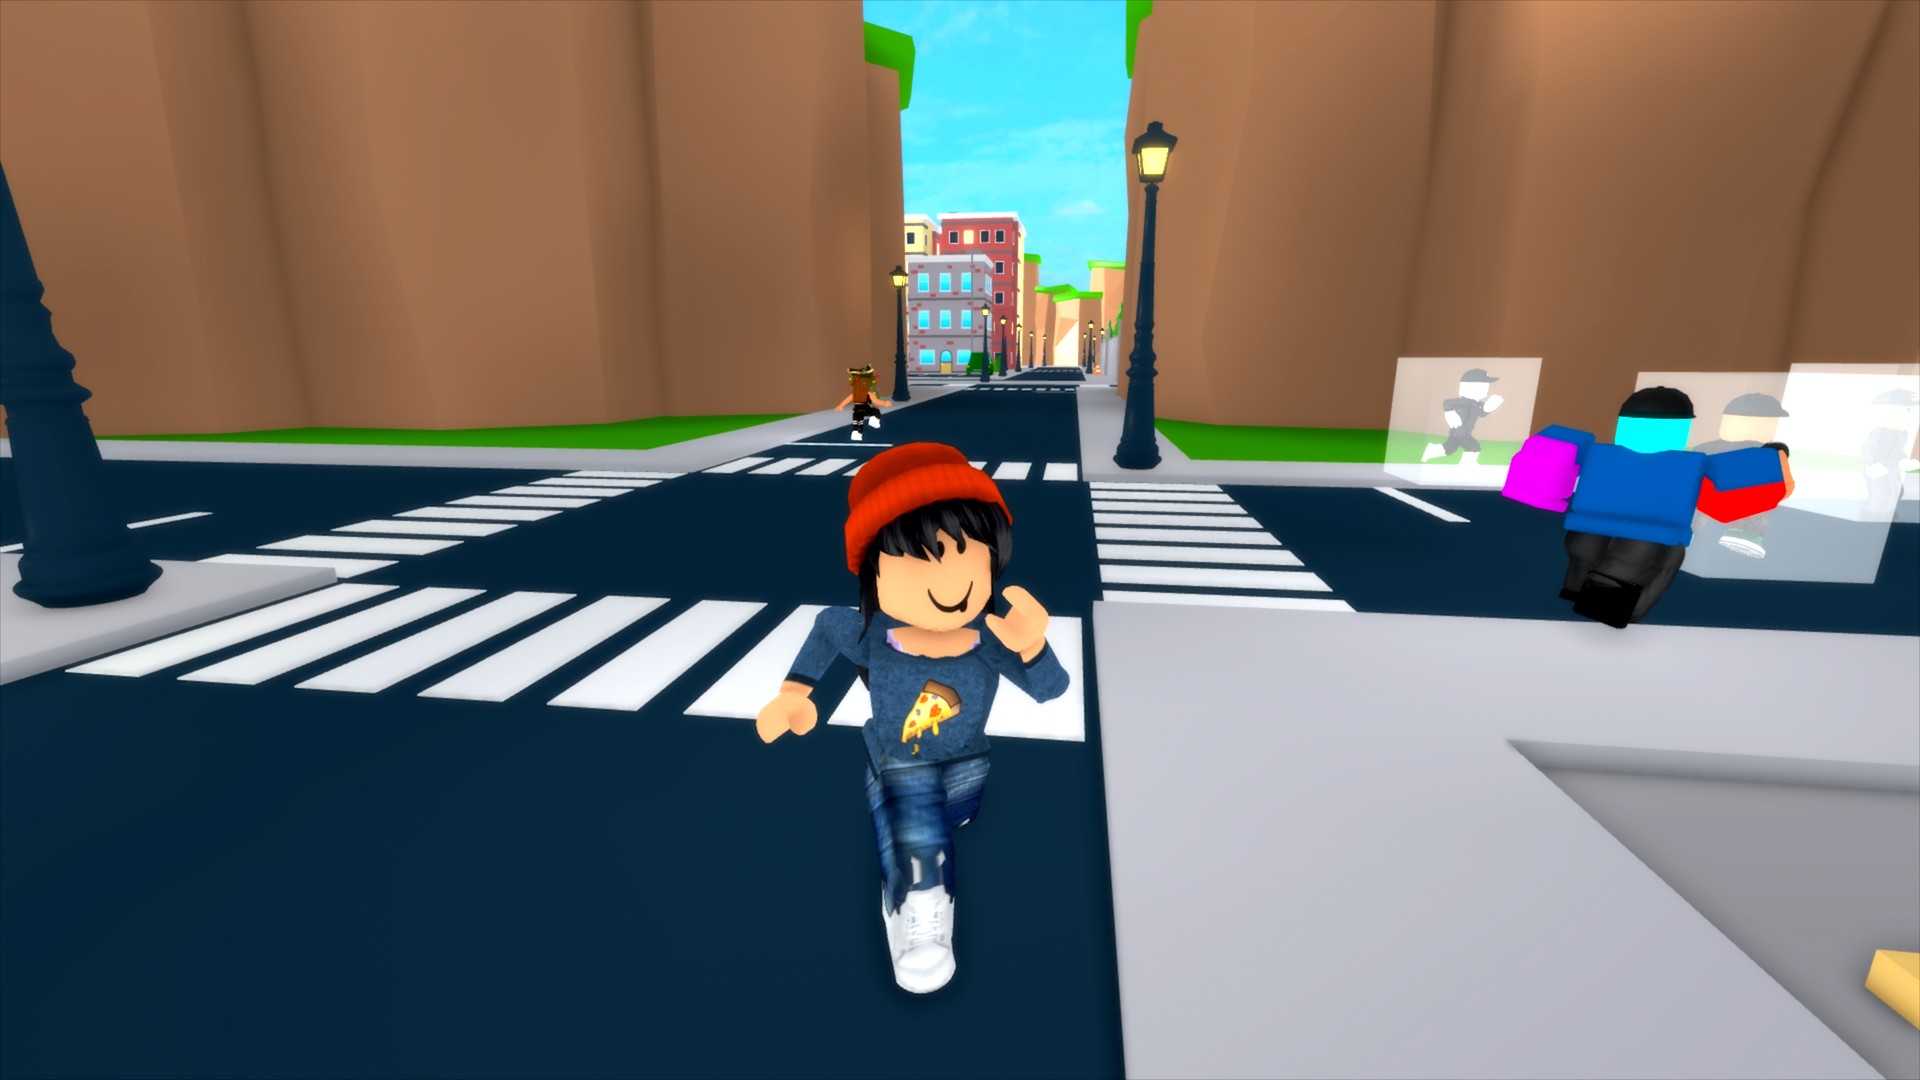 Claim Victory In Two New Maps For Freeze Tag On Roblox Best Curated Esports And Gaming News For Southeast Asia And Beyond At Your Fingertips - roblox studio randomly freezes